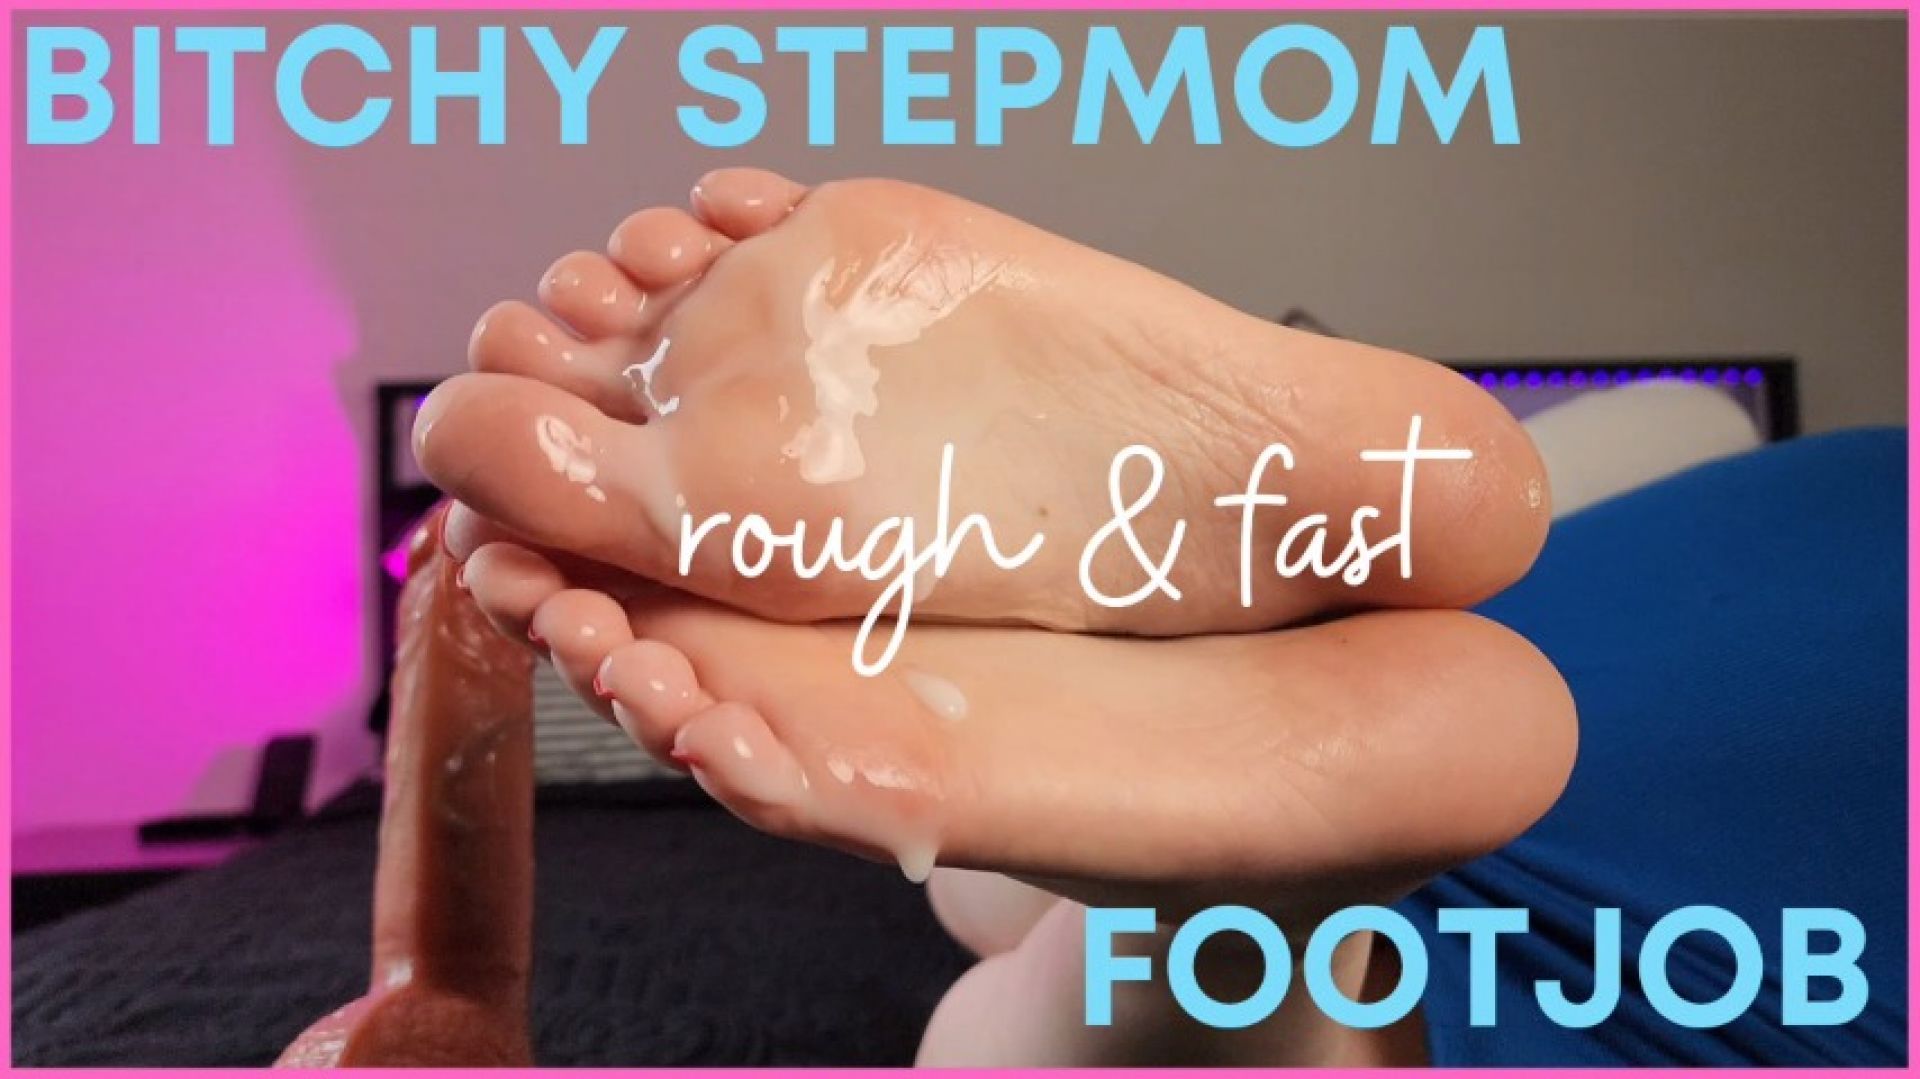 Bitchy Stepmom - Rough and Fast Footjob